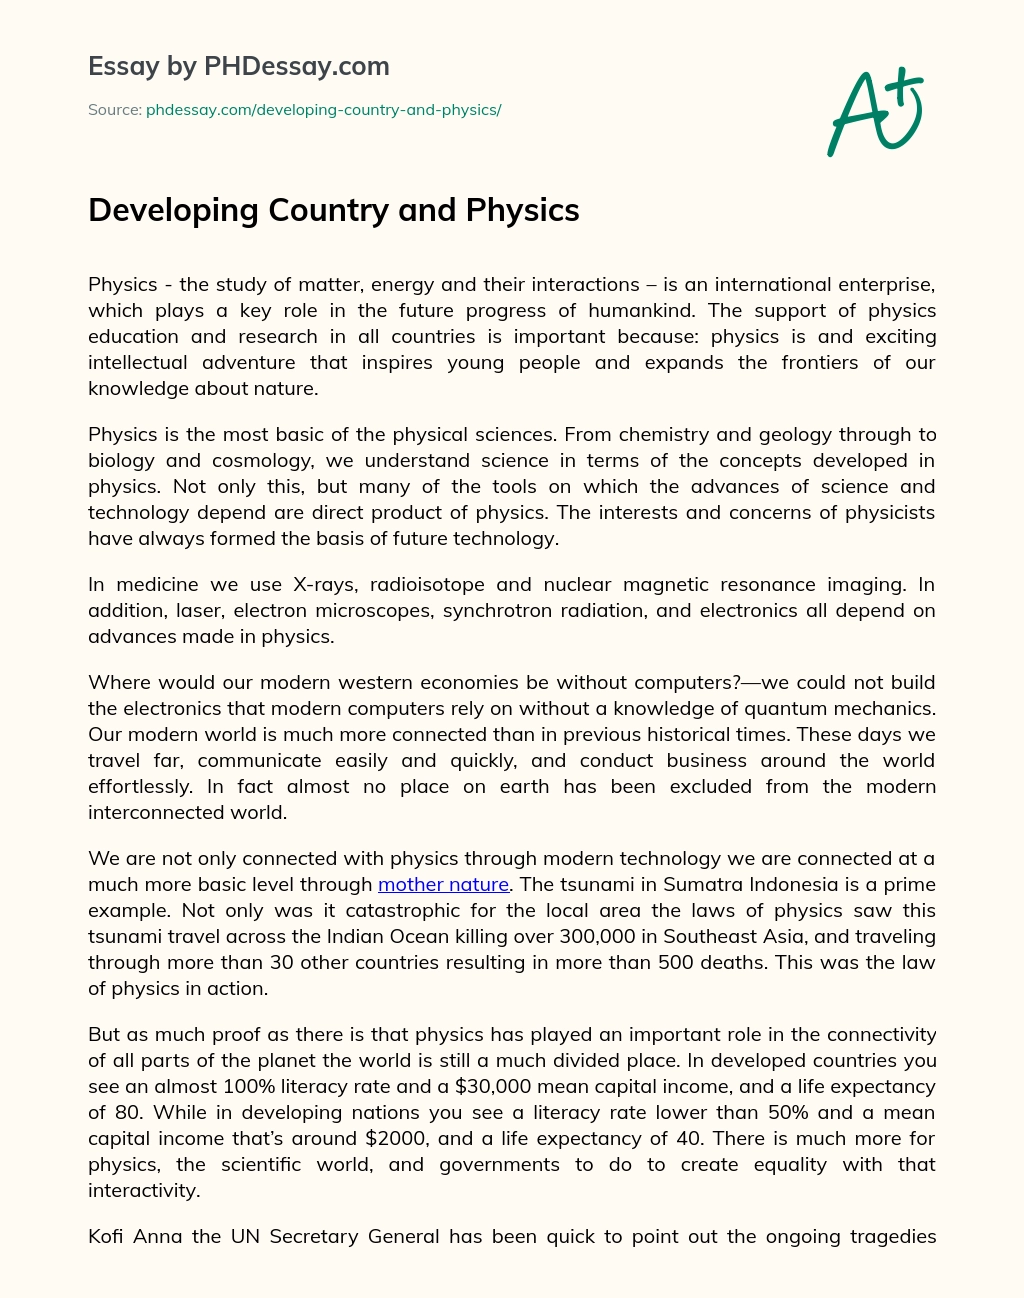 Developing Country and Physics essay